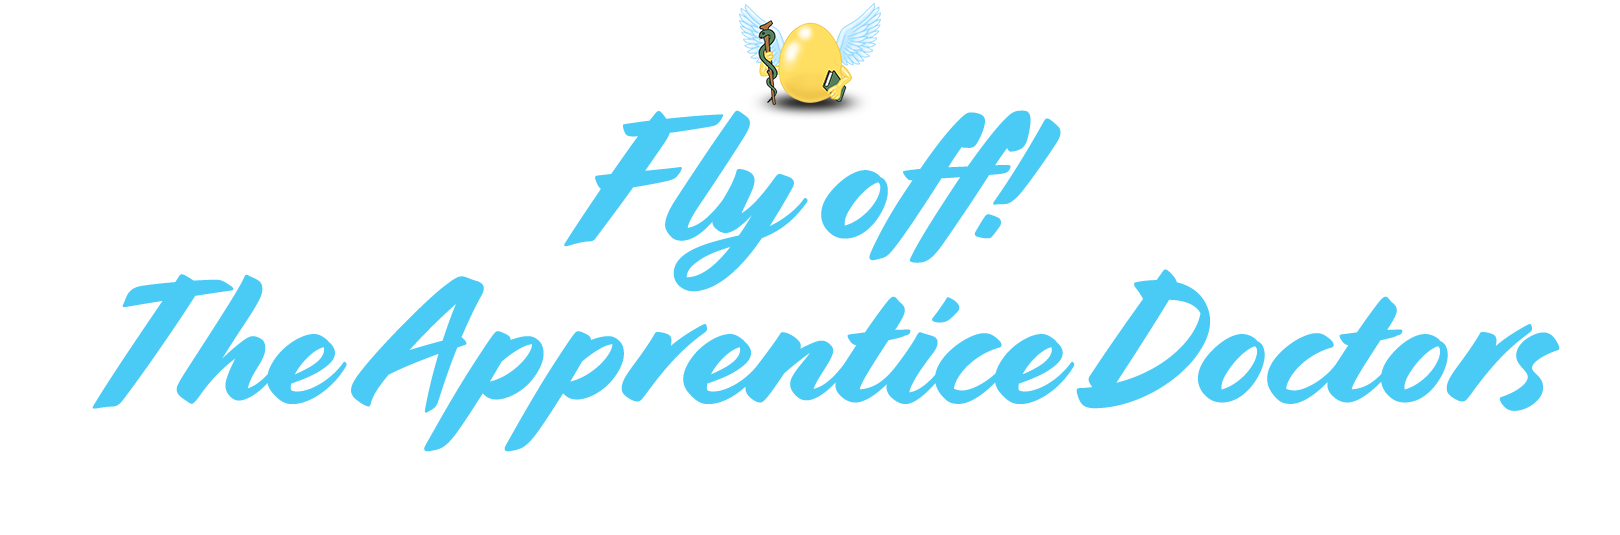 Fly off! The Apprentice Doctors